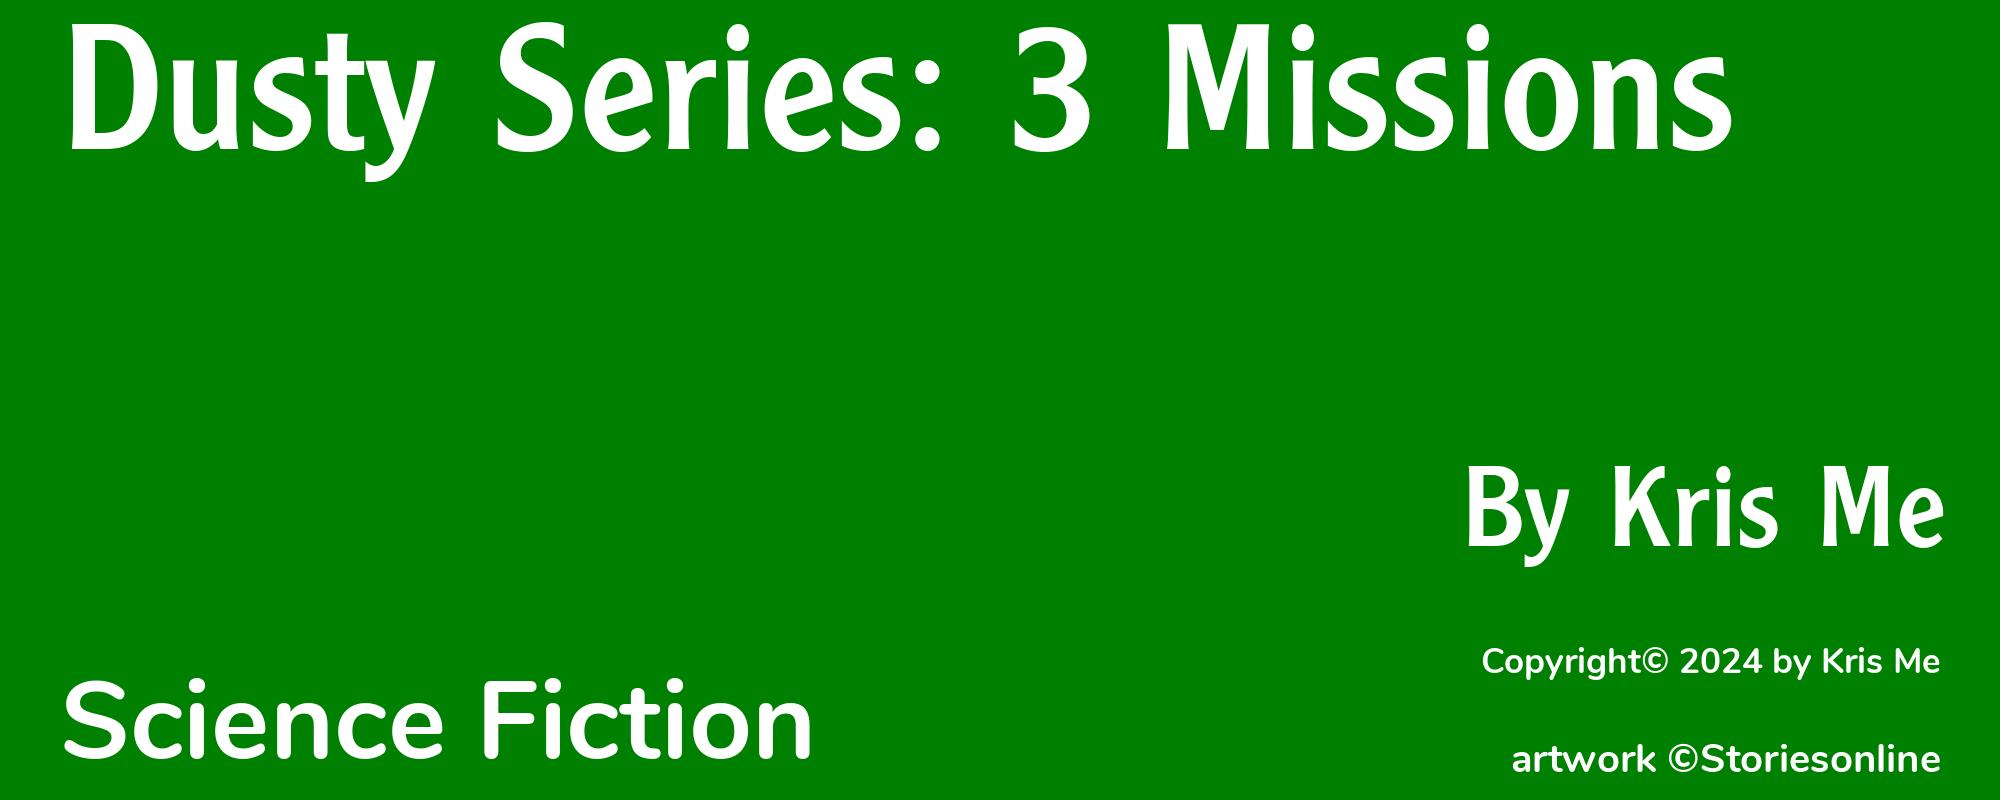 Dusty Series: 3 Missions - Cover